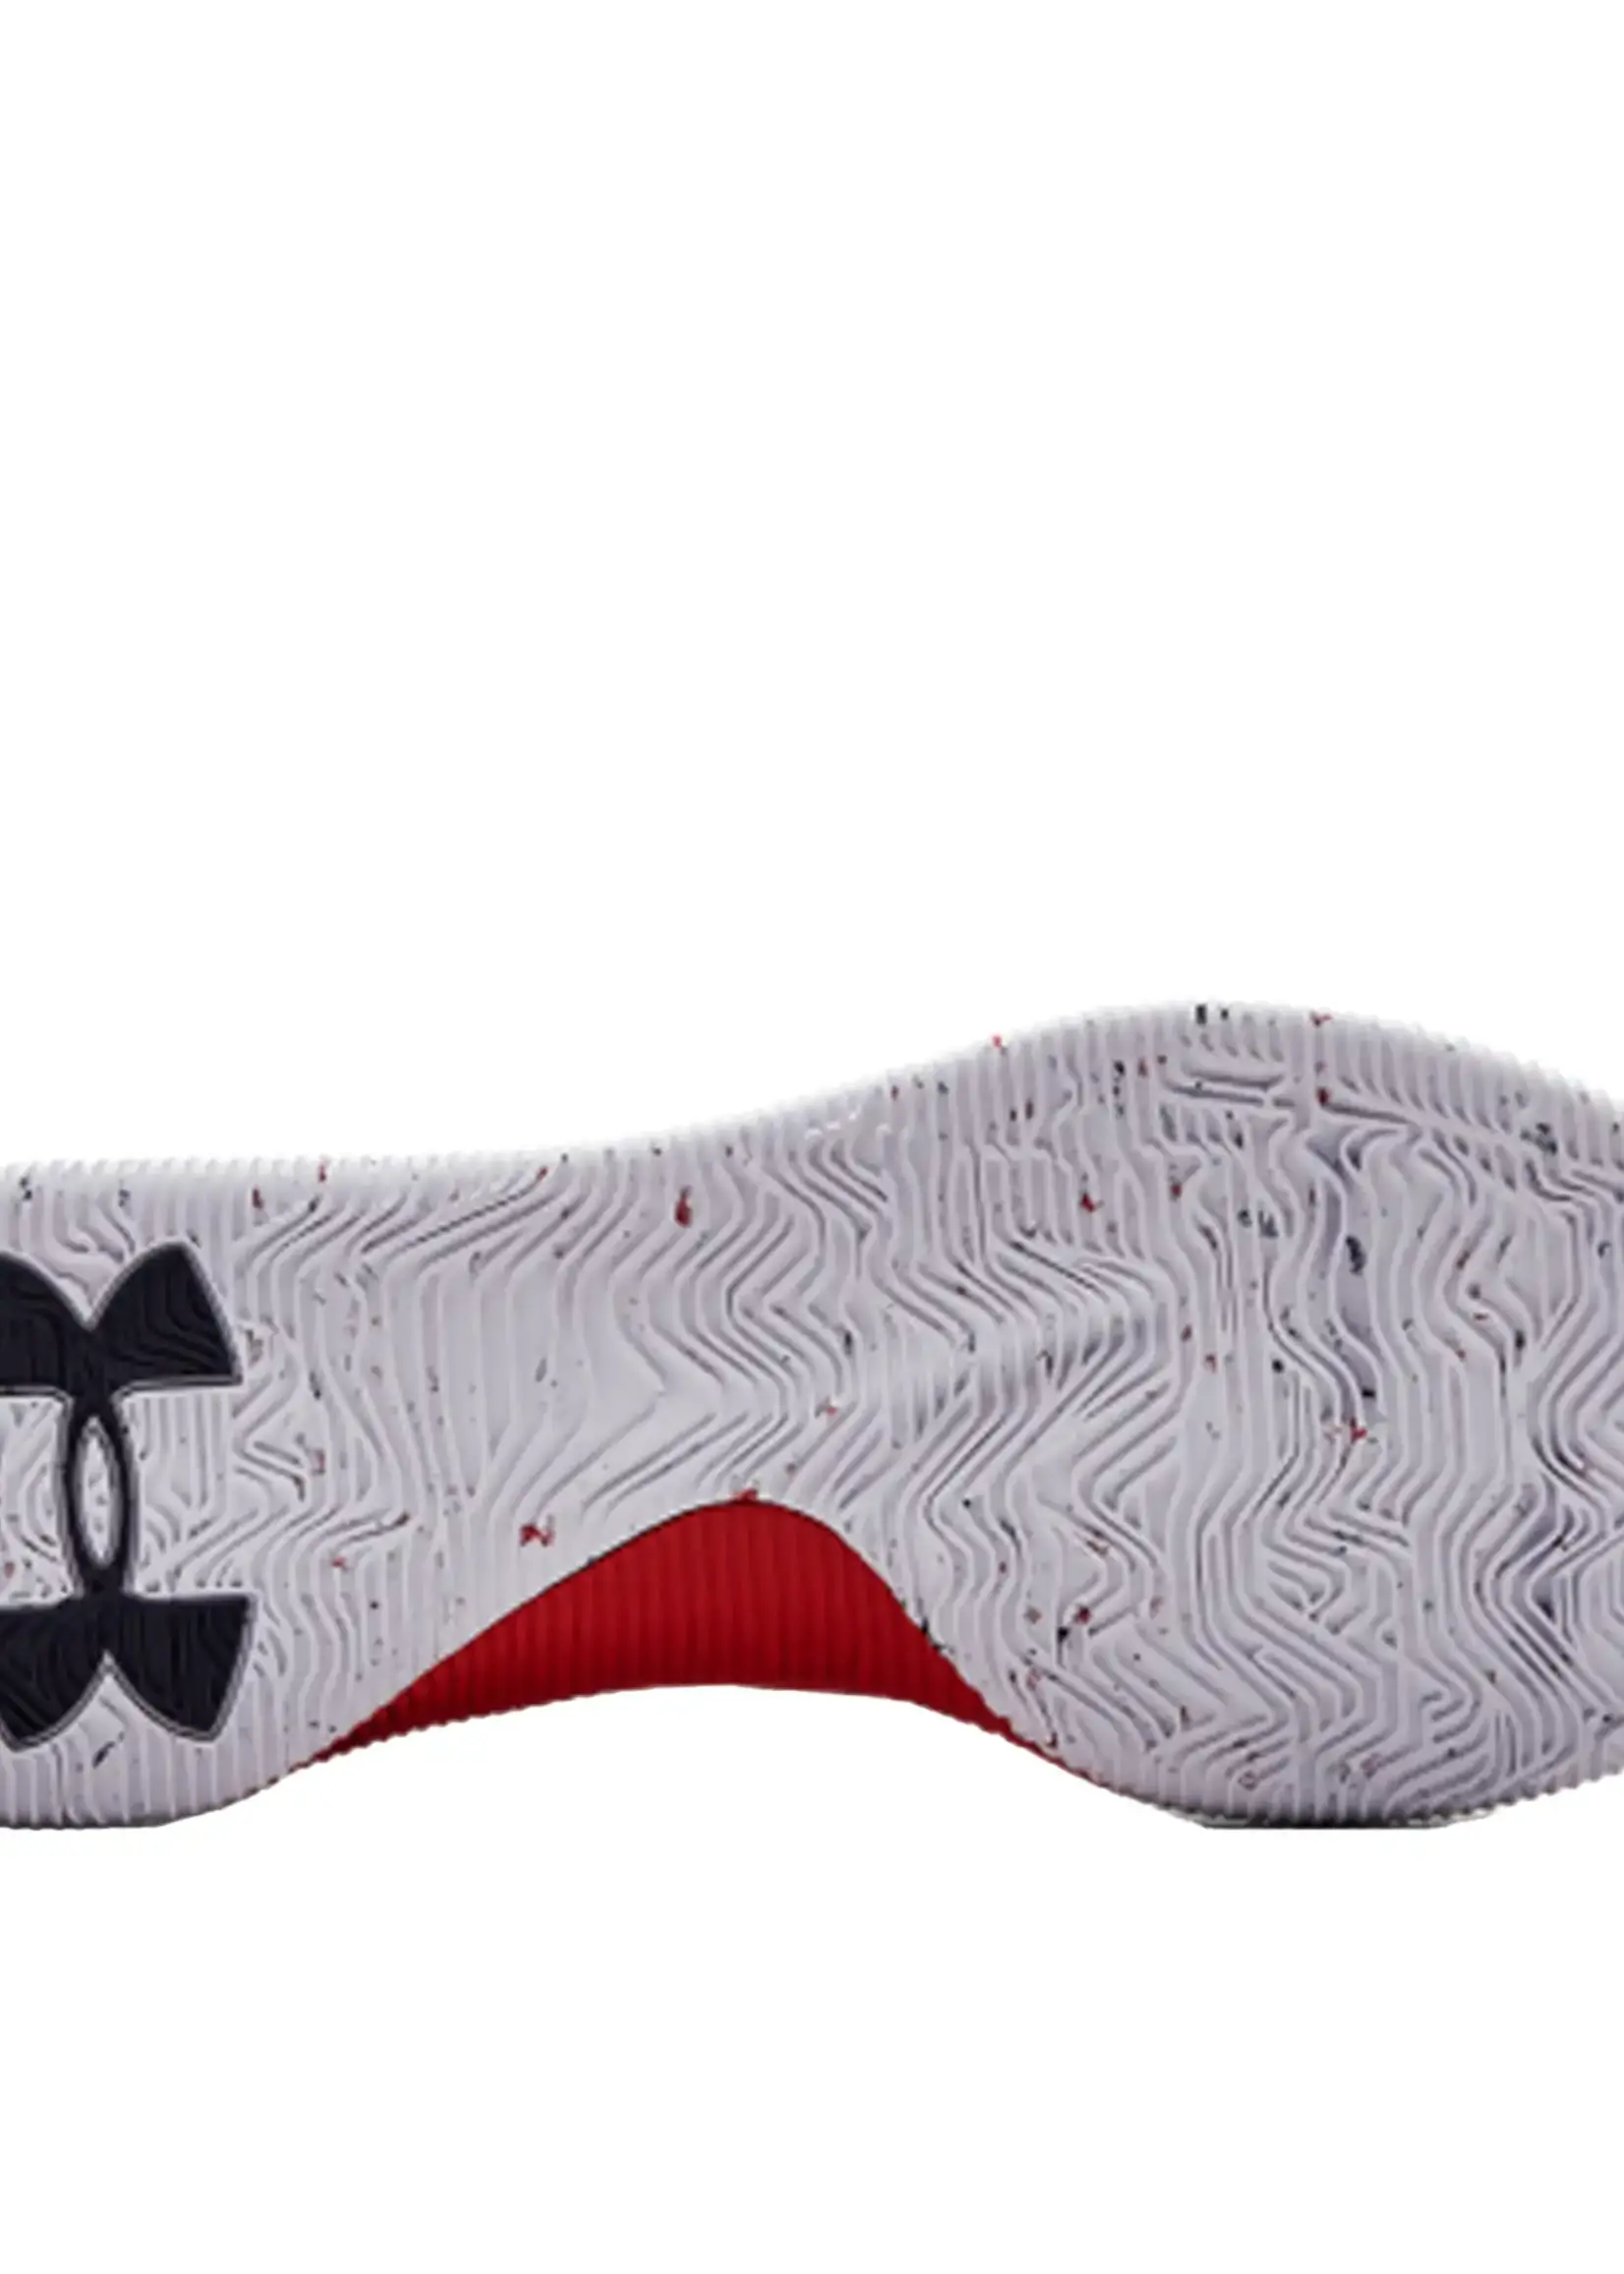 Under Armour M-Tag Red